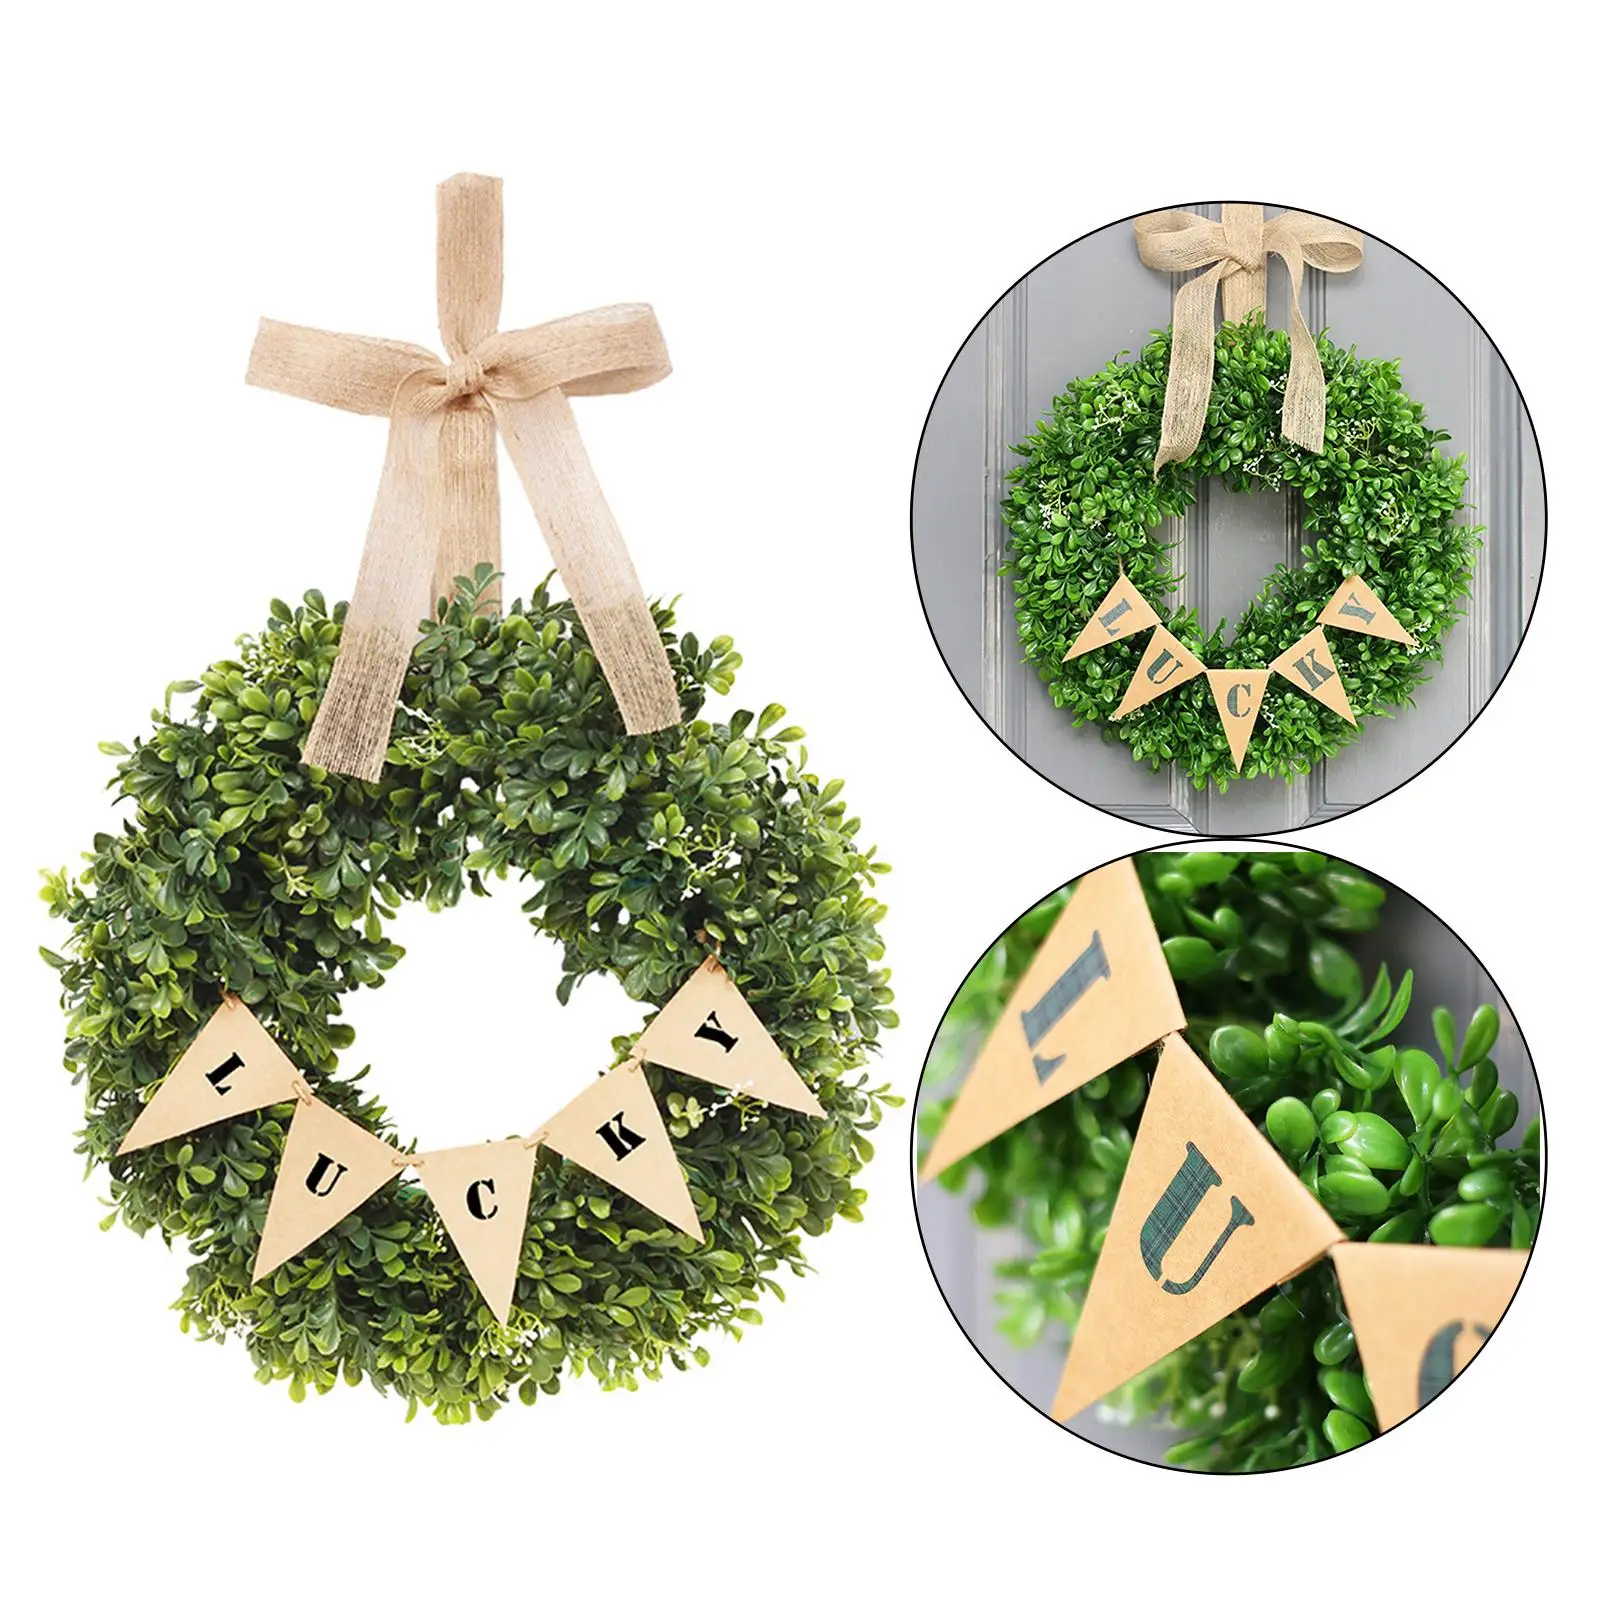 40cm Easter Greenery Wreath Spring Wreaths Window Party Decor ,Durable Materials Suit for All Scenarios Widely Usages Home Décor